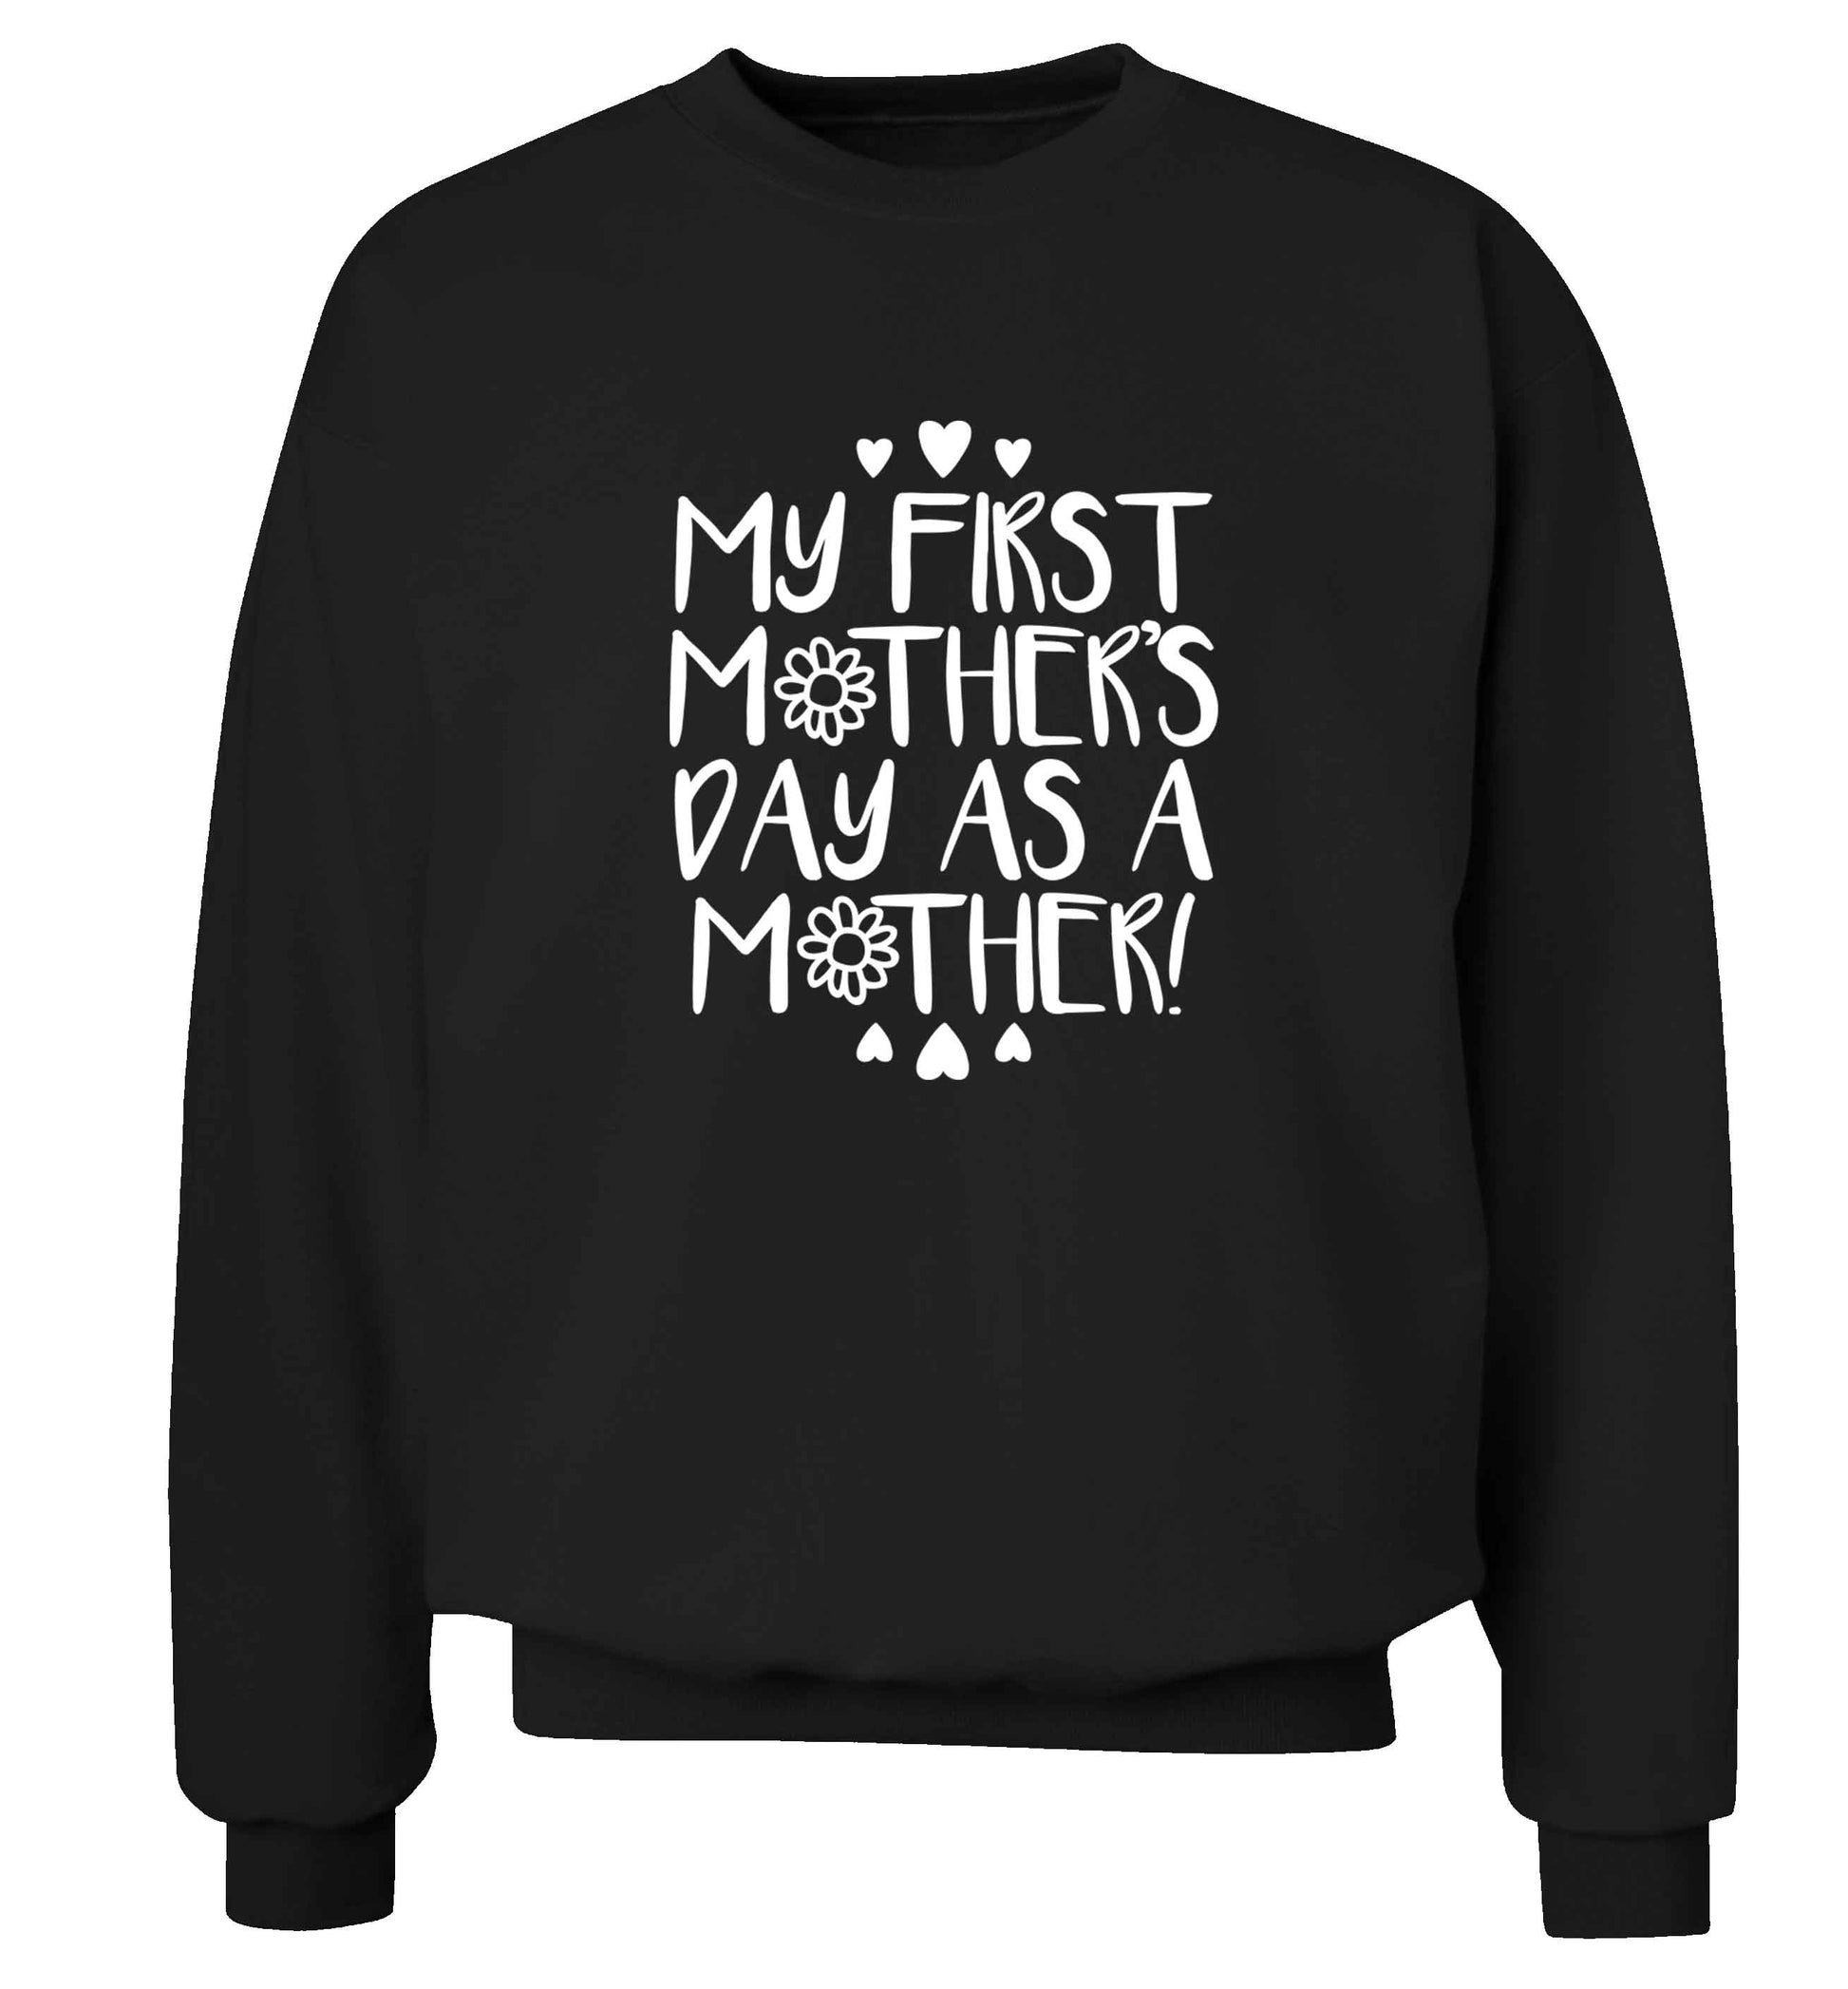 It's my first mother's day as a mother adult's unisex black sweater 2XL